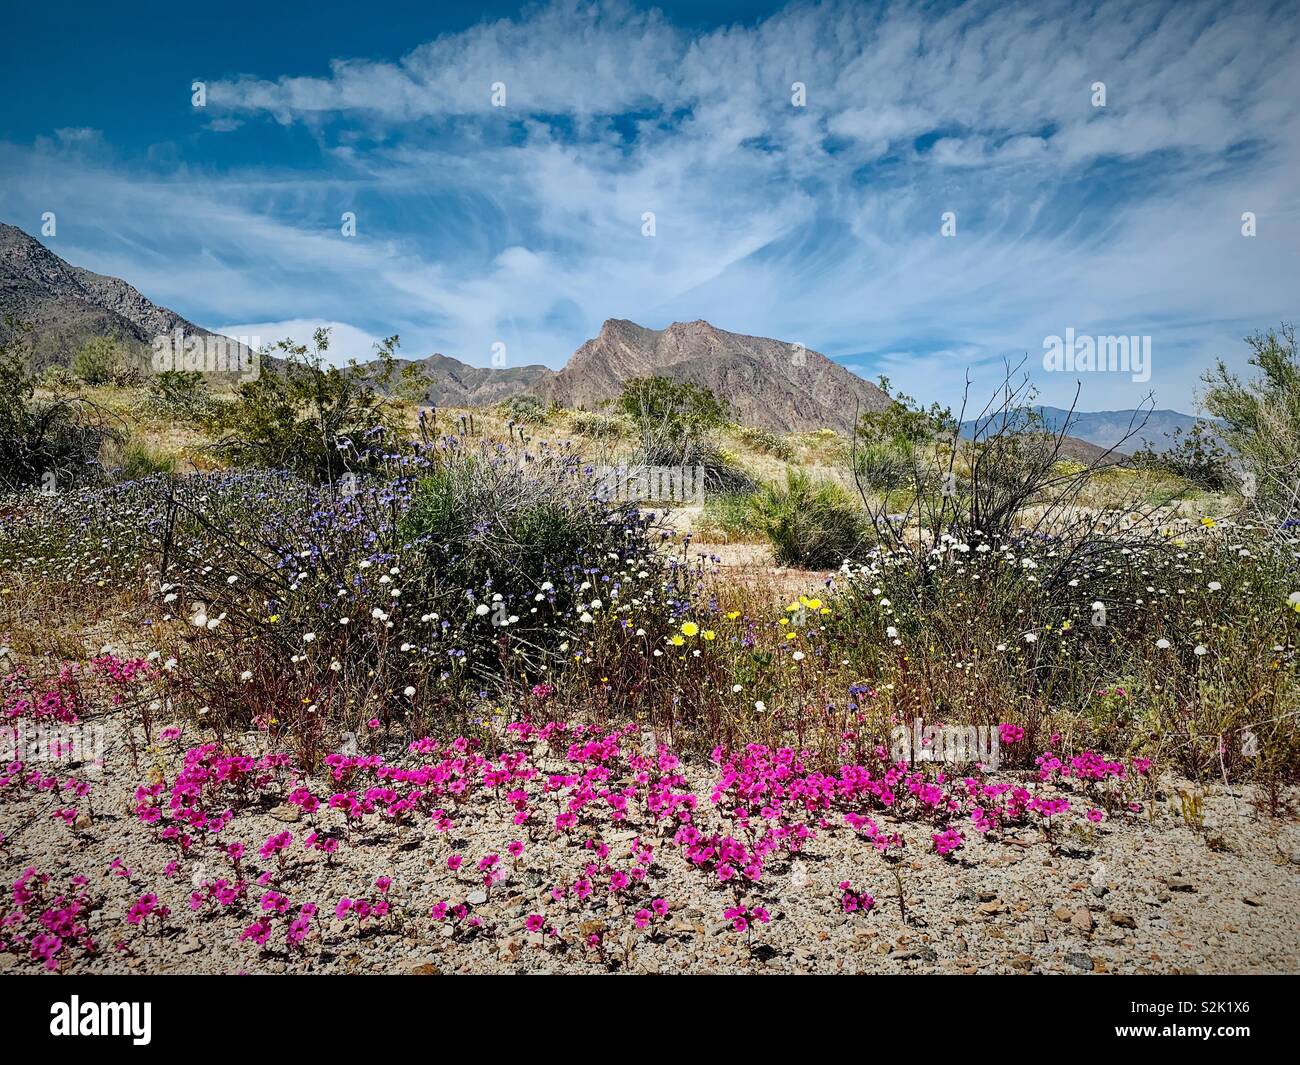 A landscape photo showing wildflowers in the desert of Anza Borrego State Park, in Southern California. Stock Photo